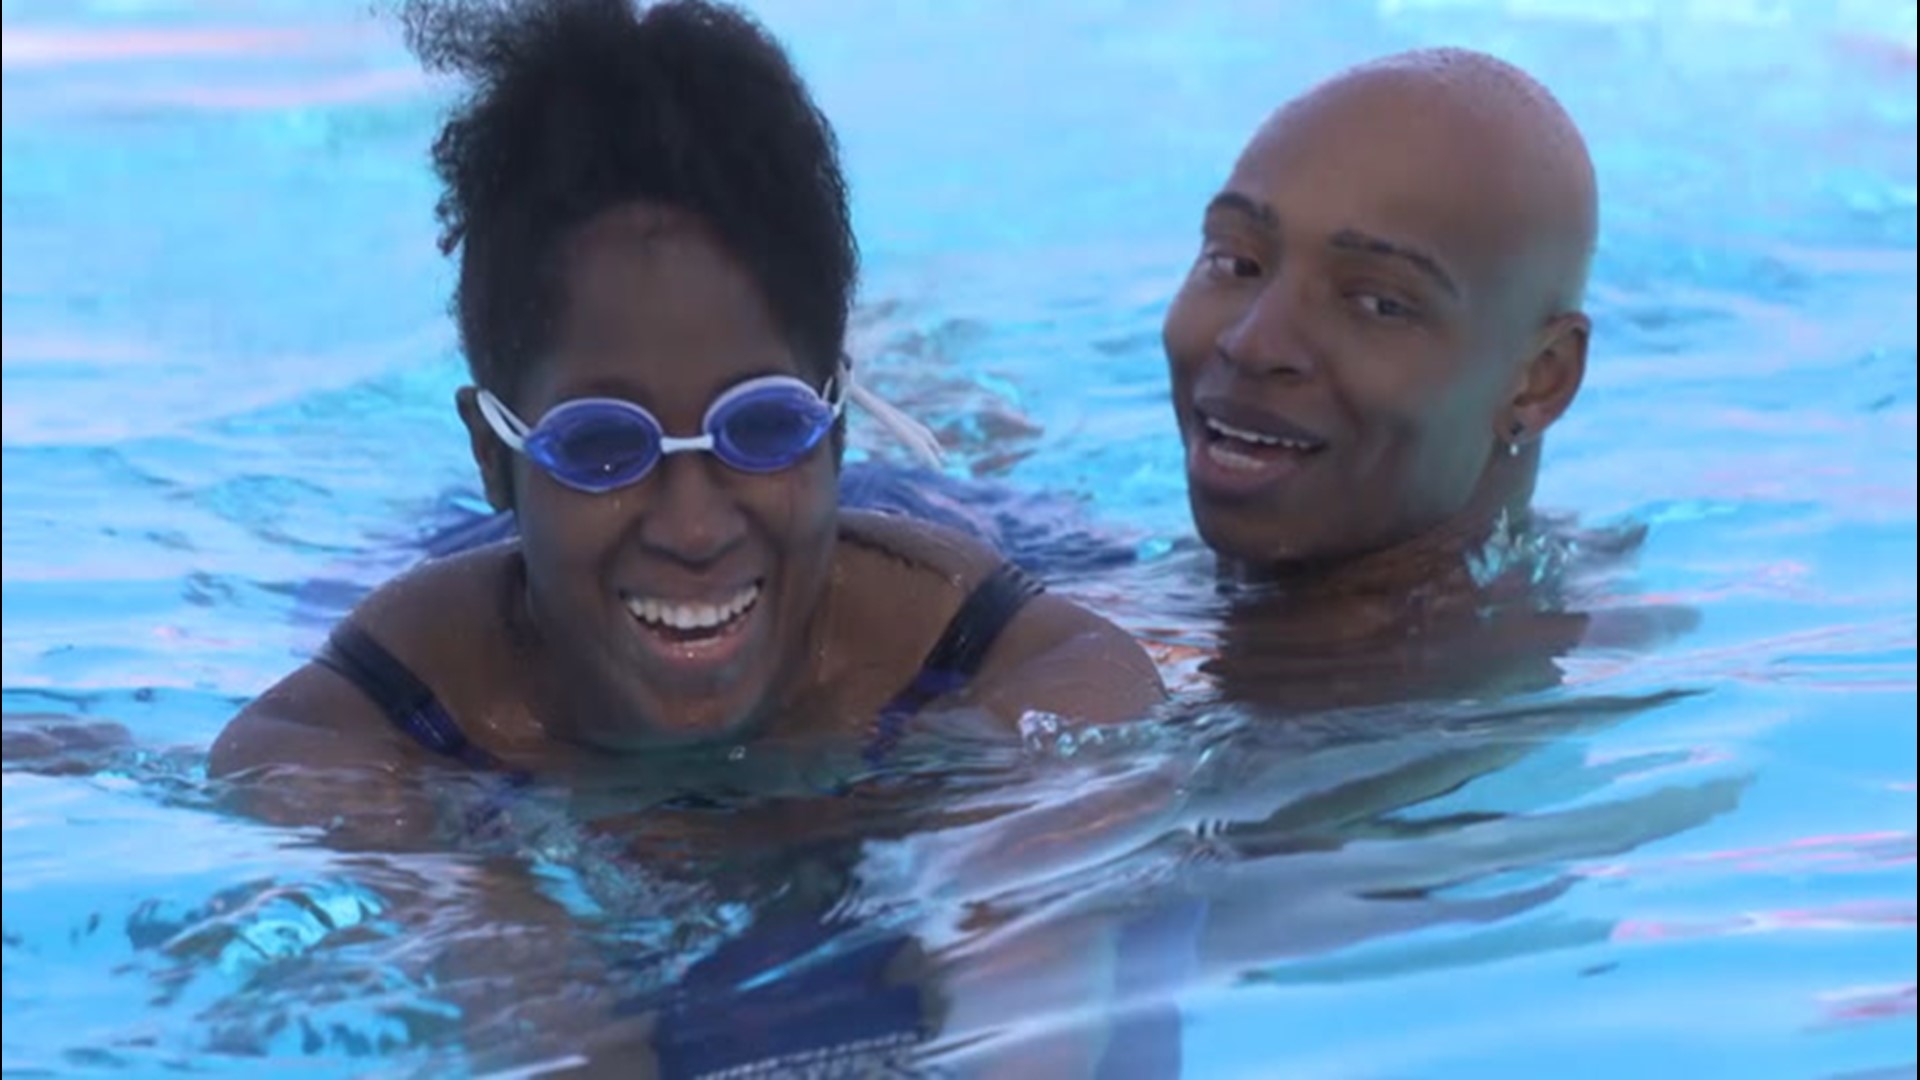 AccuWeather's Dexter Henry spoke with U.S. Olympian Cullen Jones, who is playing a roll to educate Americans about water safety.